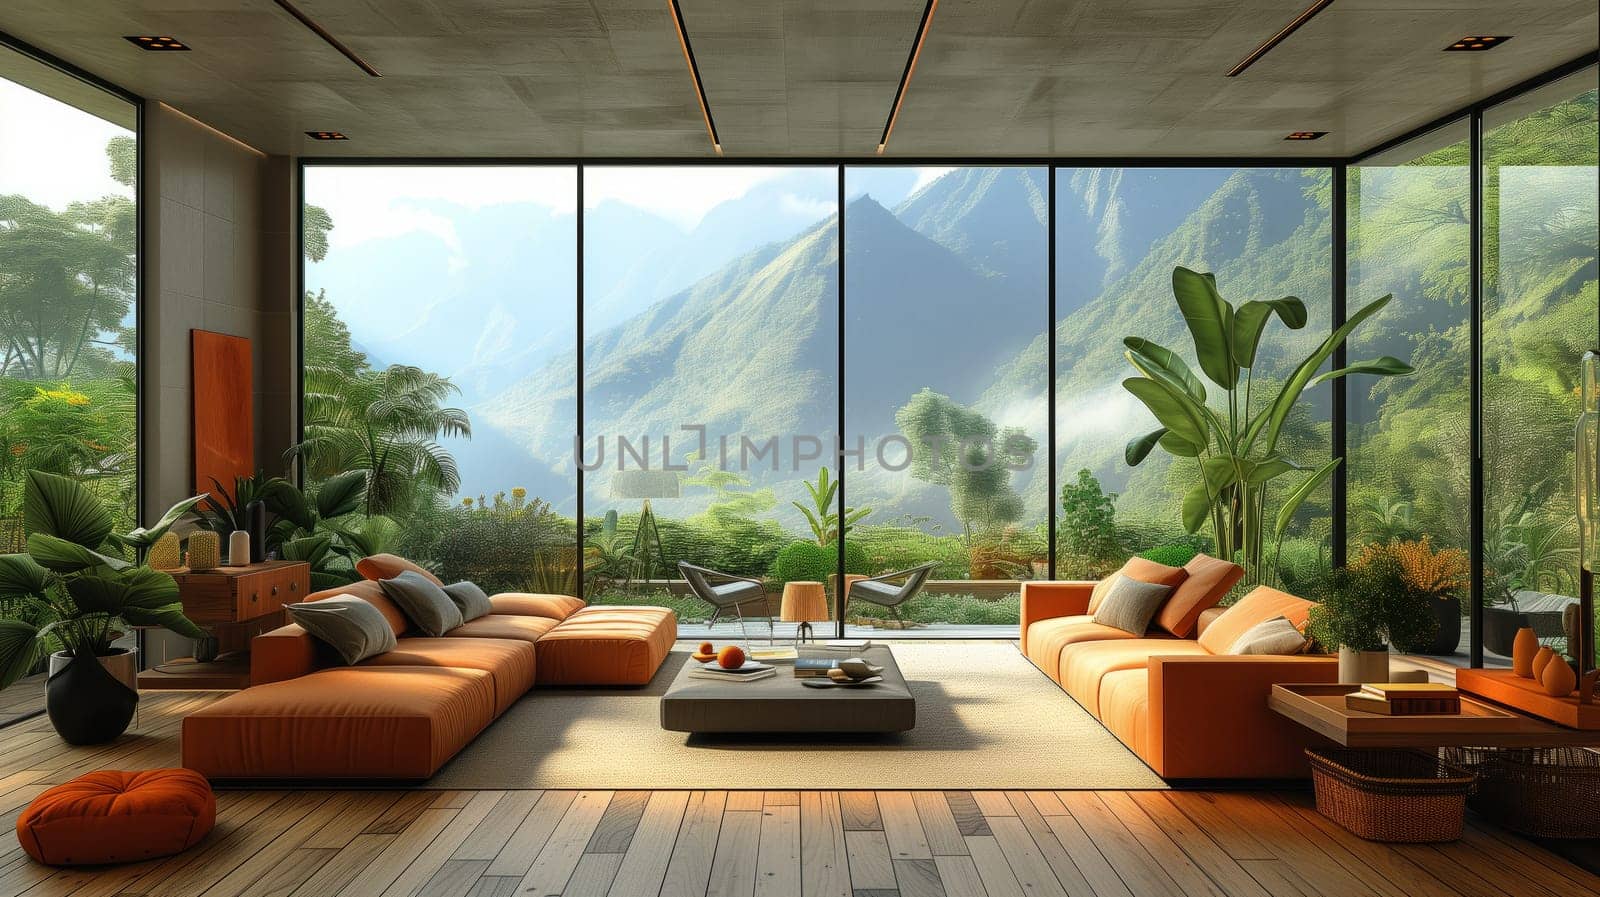 A living room with numerous windows offering a picturesque view of mountains, surrounded by lush trees and under a clear sky